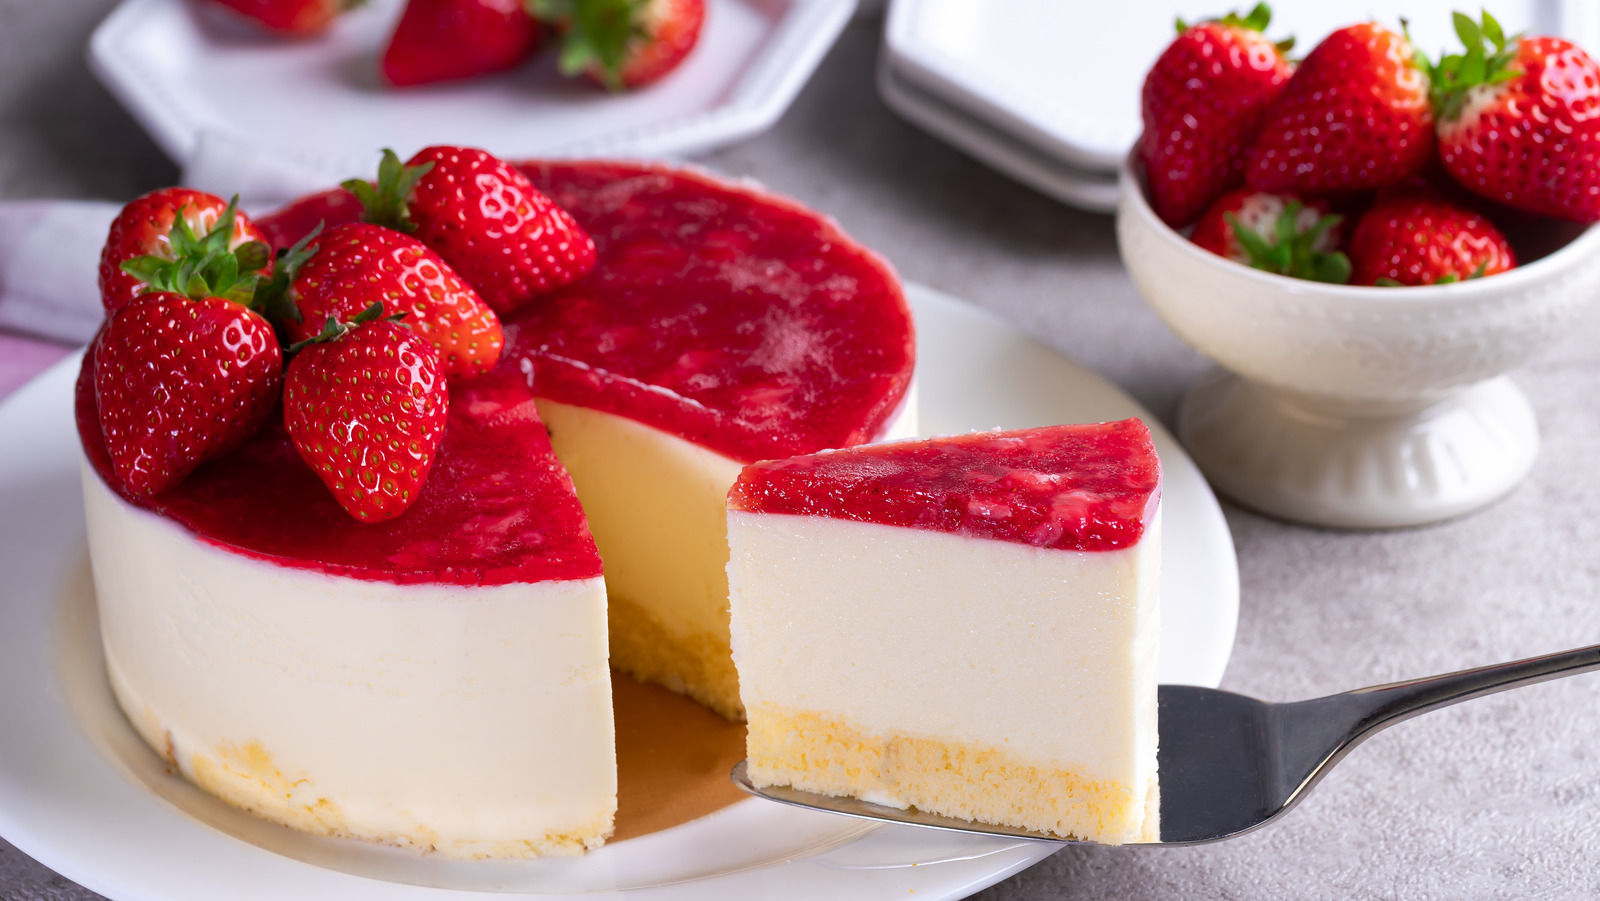 https://www.mashed.com/img/gallery/how-to-make-the-perfect-cheesecake-crust-every-time/l-intro-1692803235.jpg